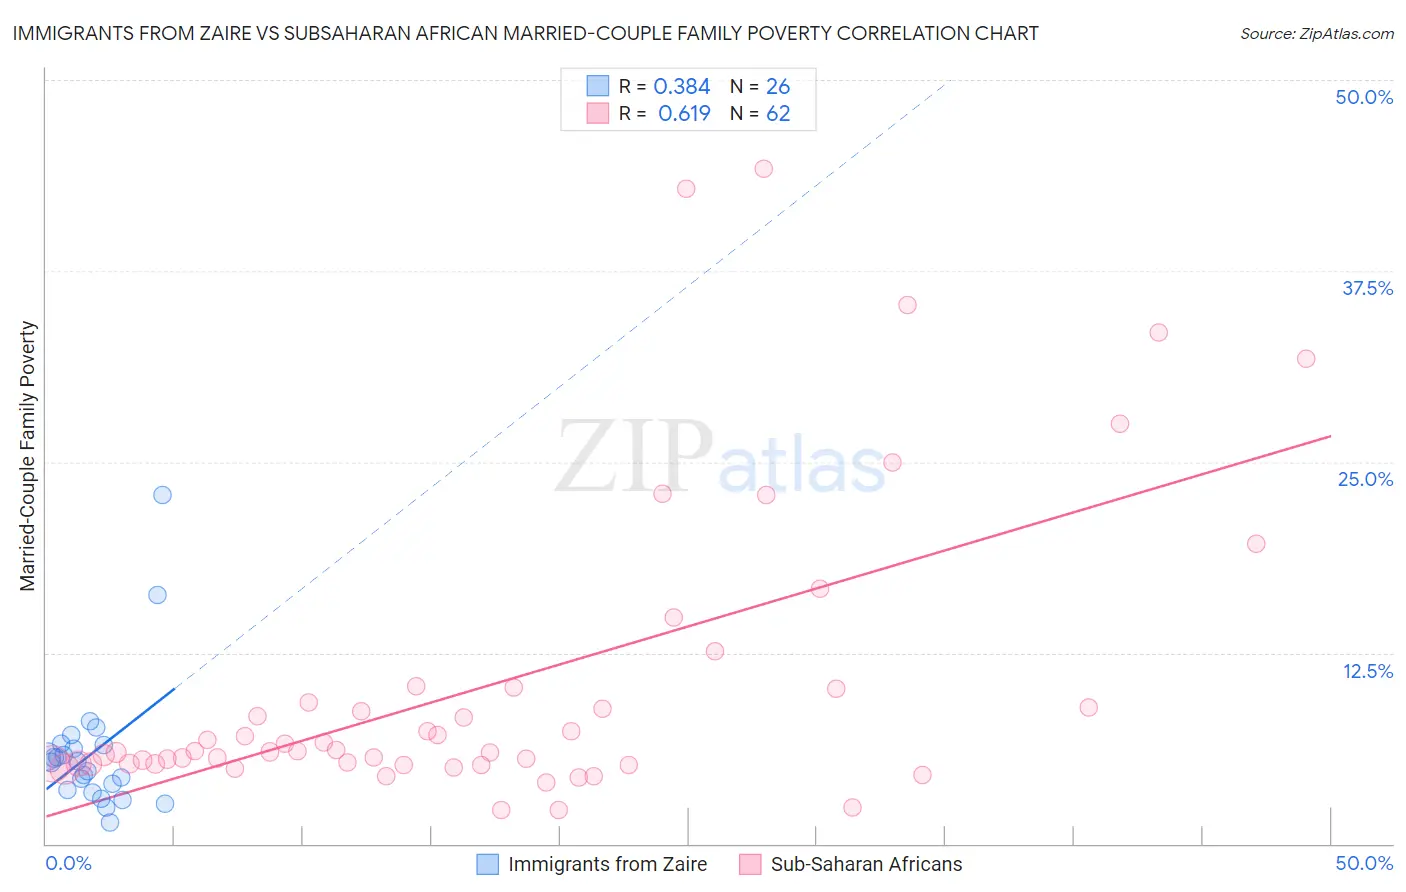 Immigrants from Zaire vs Subsaharan African Married-Couple Family Poverty